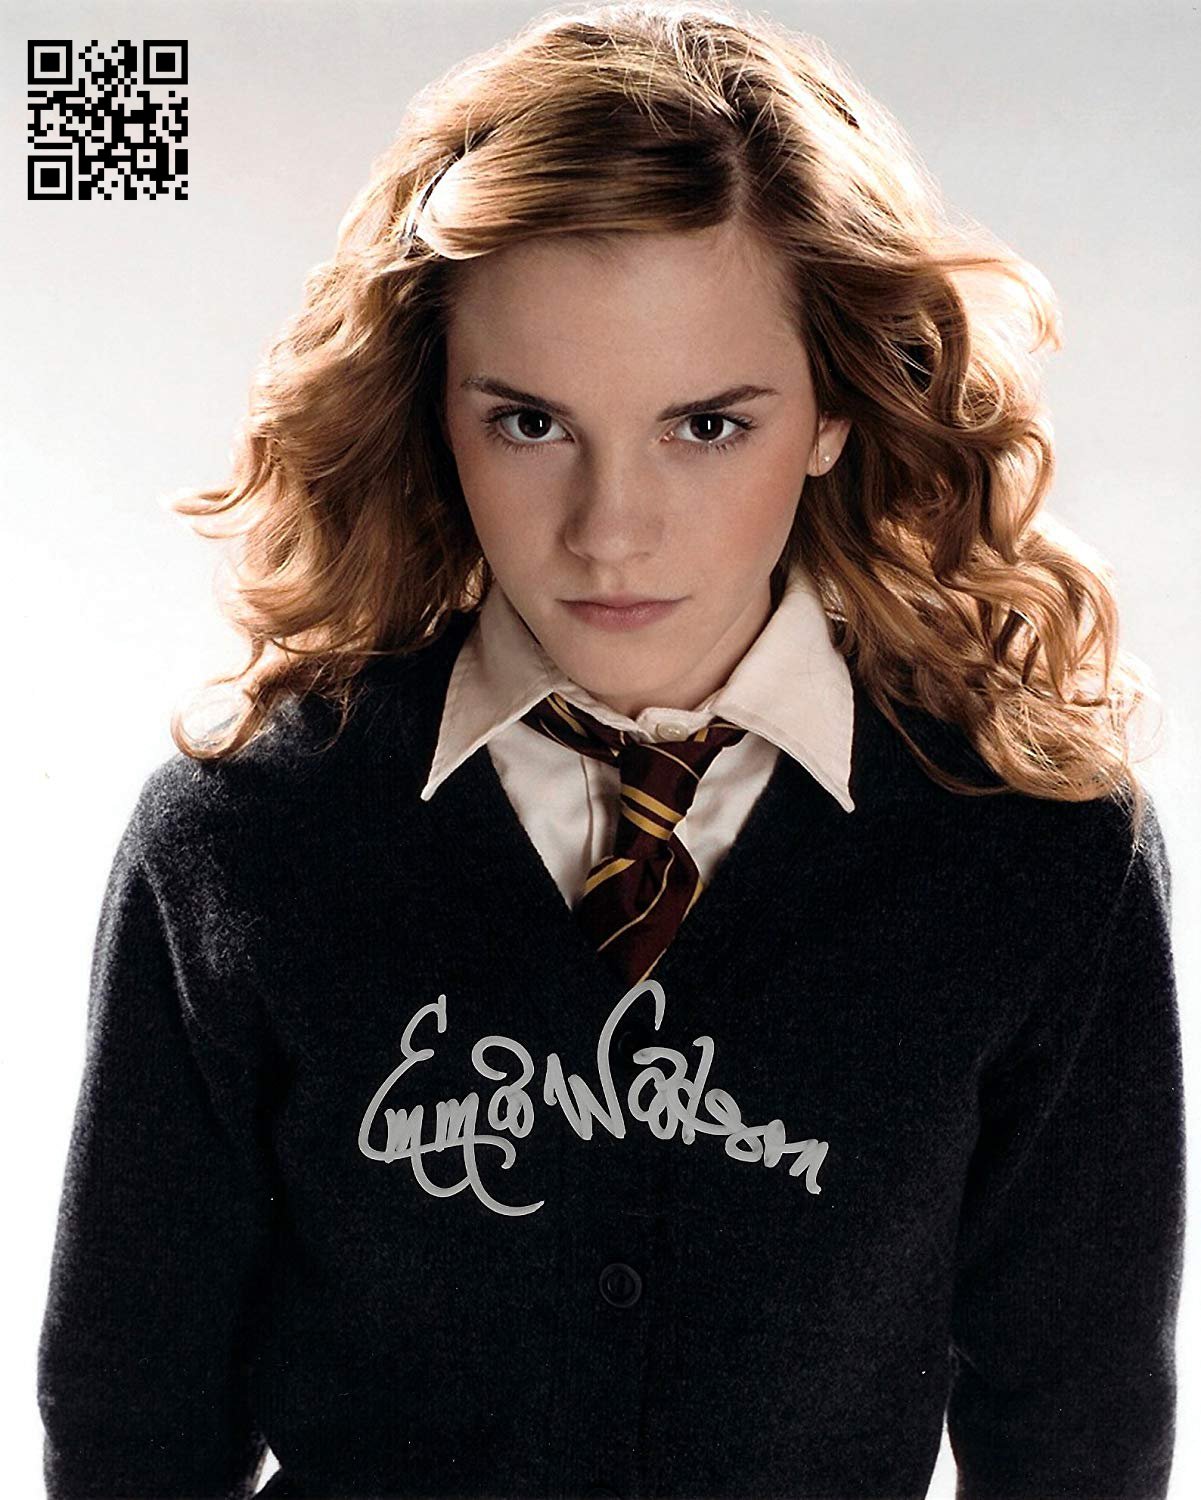 Emma Watson Harry Potter Awesome 8 X 10" Signed & Mounted Autographed Photo (Reprint #4)